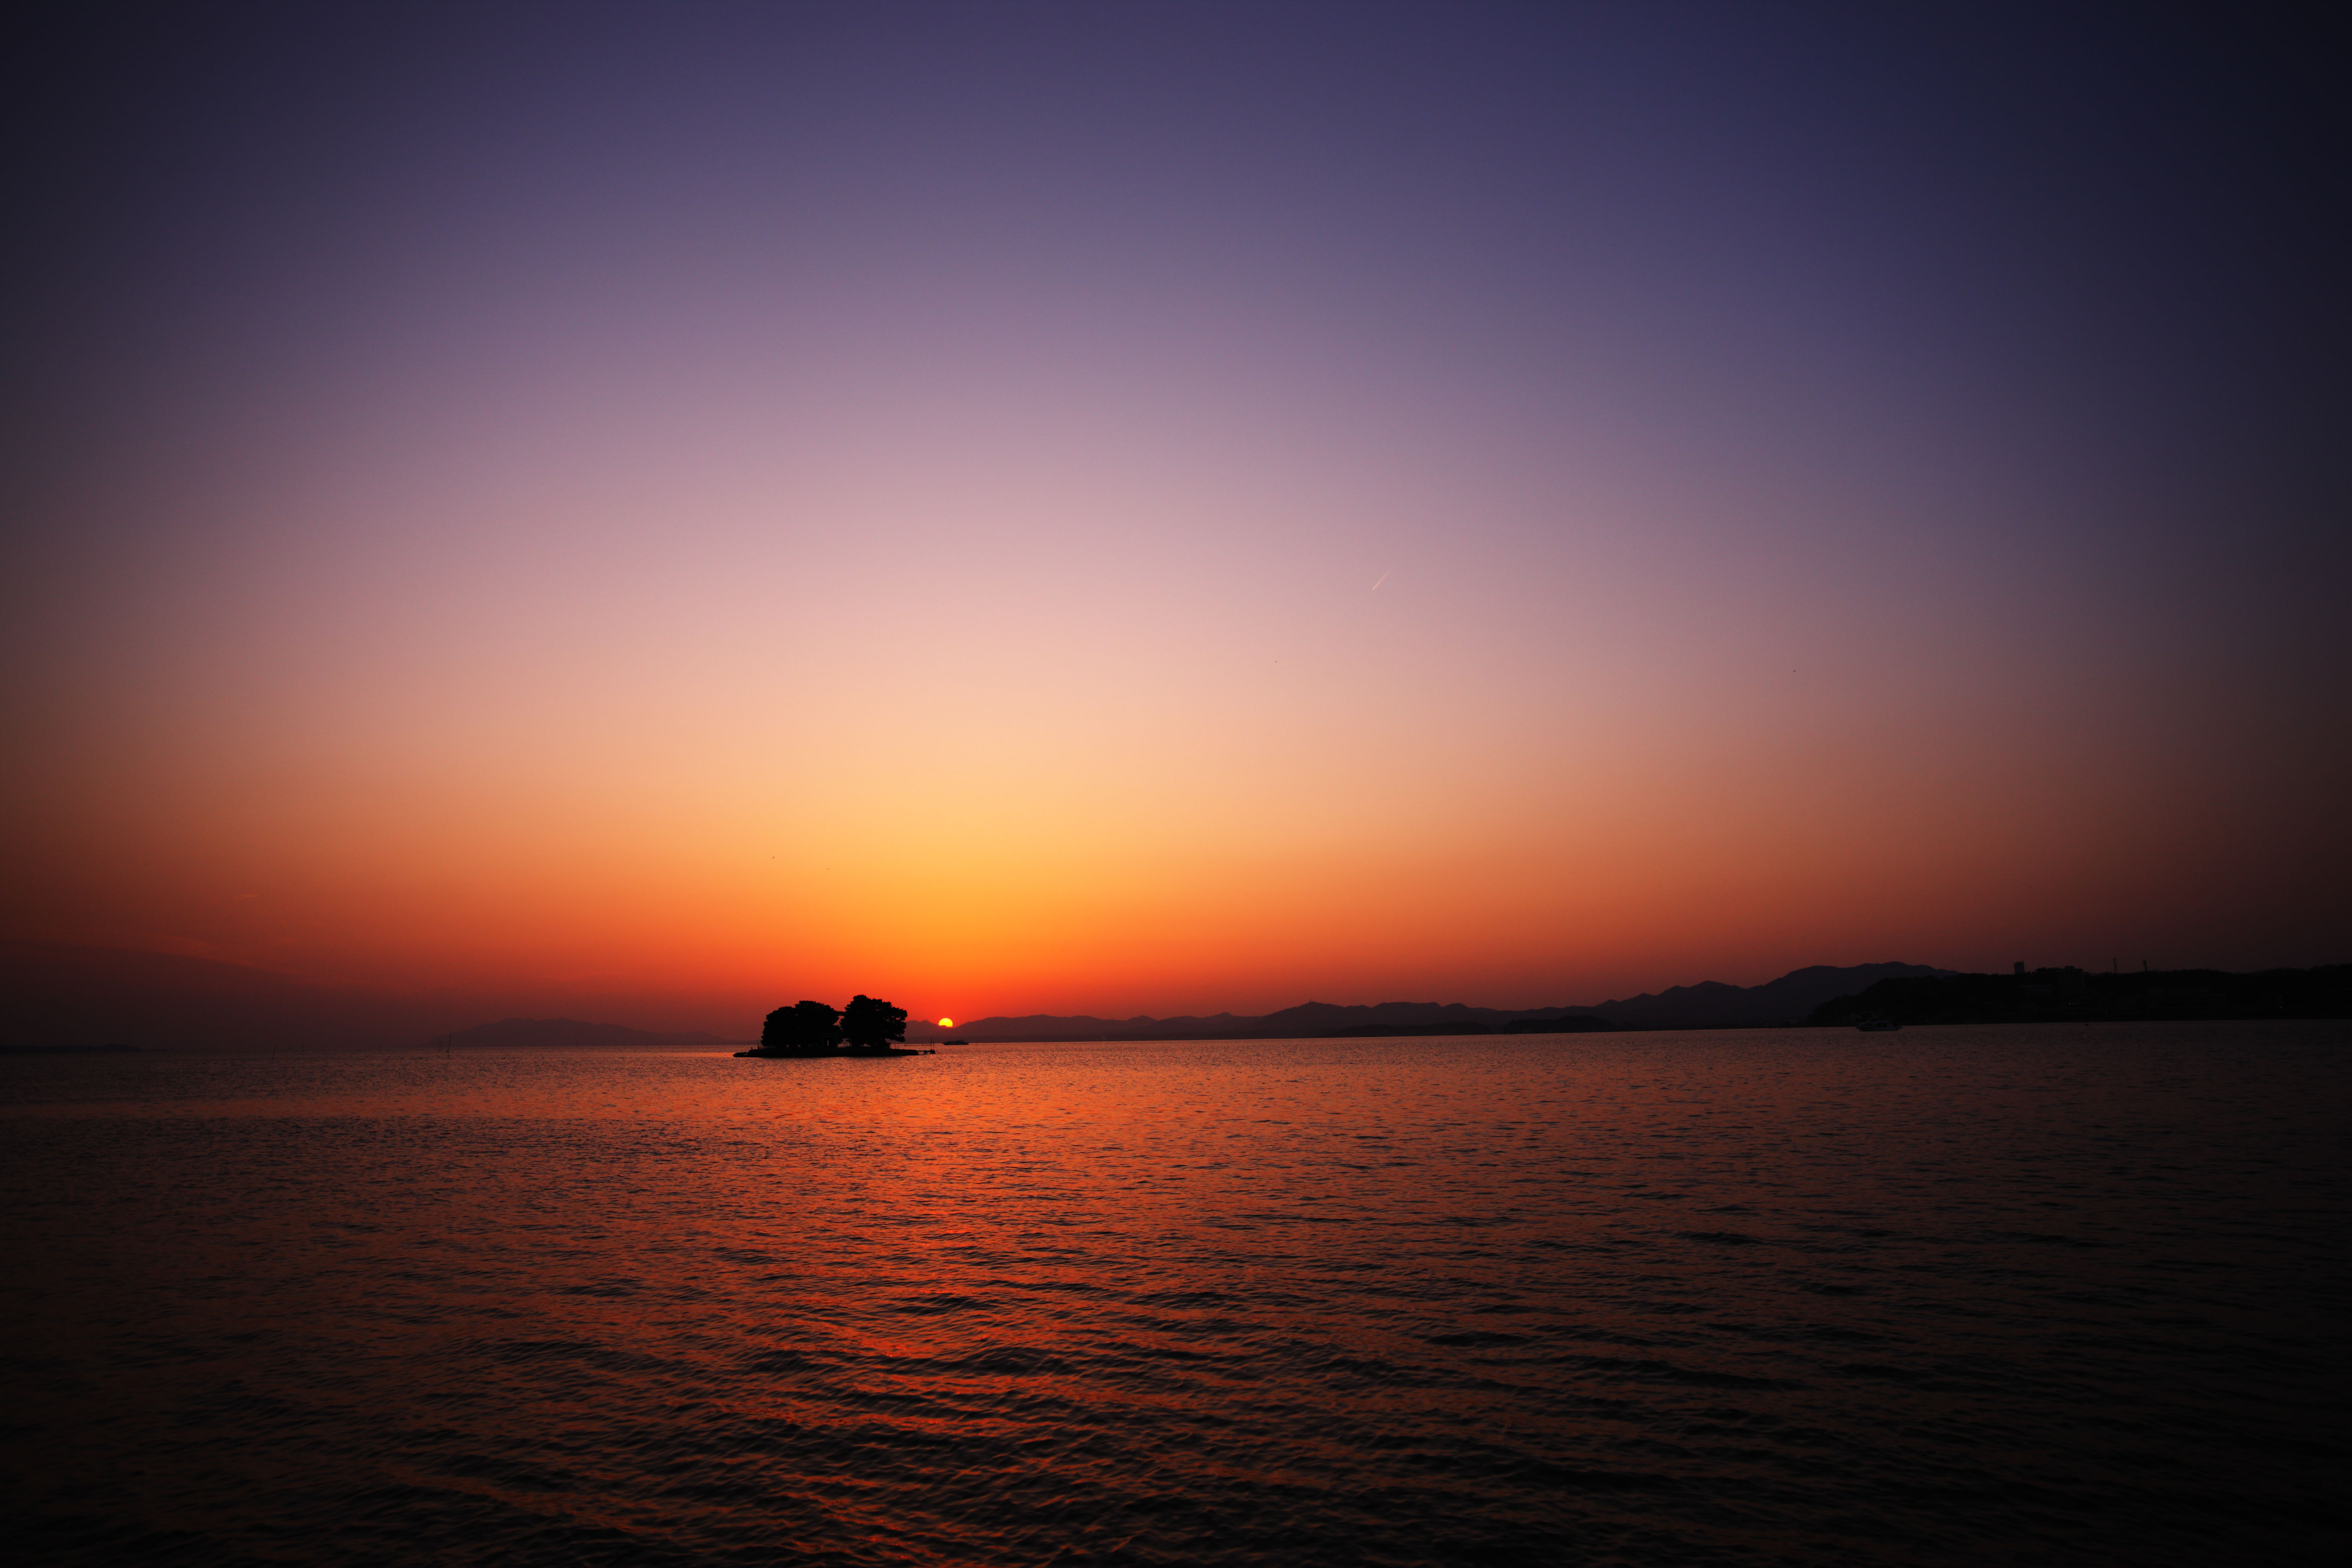 photo,material,free,landscape,picture,stock photo,Creative Commons,The setting sun of Lake Shinji-ko, The sun, The surface of the water, Bride Island, 100 selections of Japanese setting sun